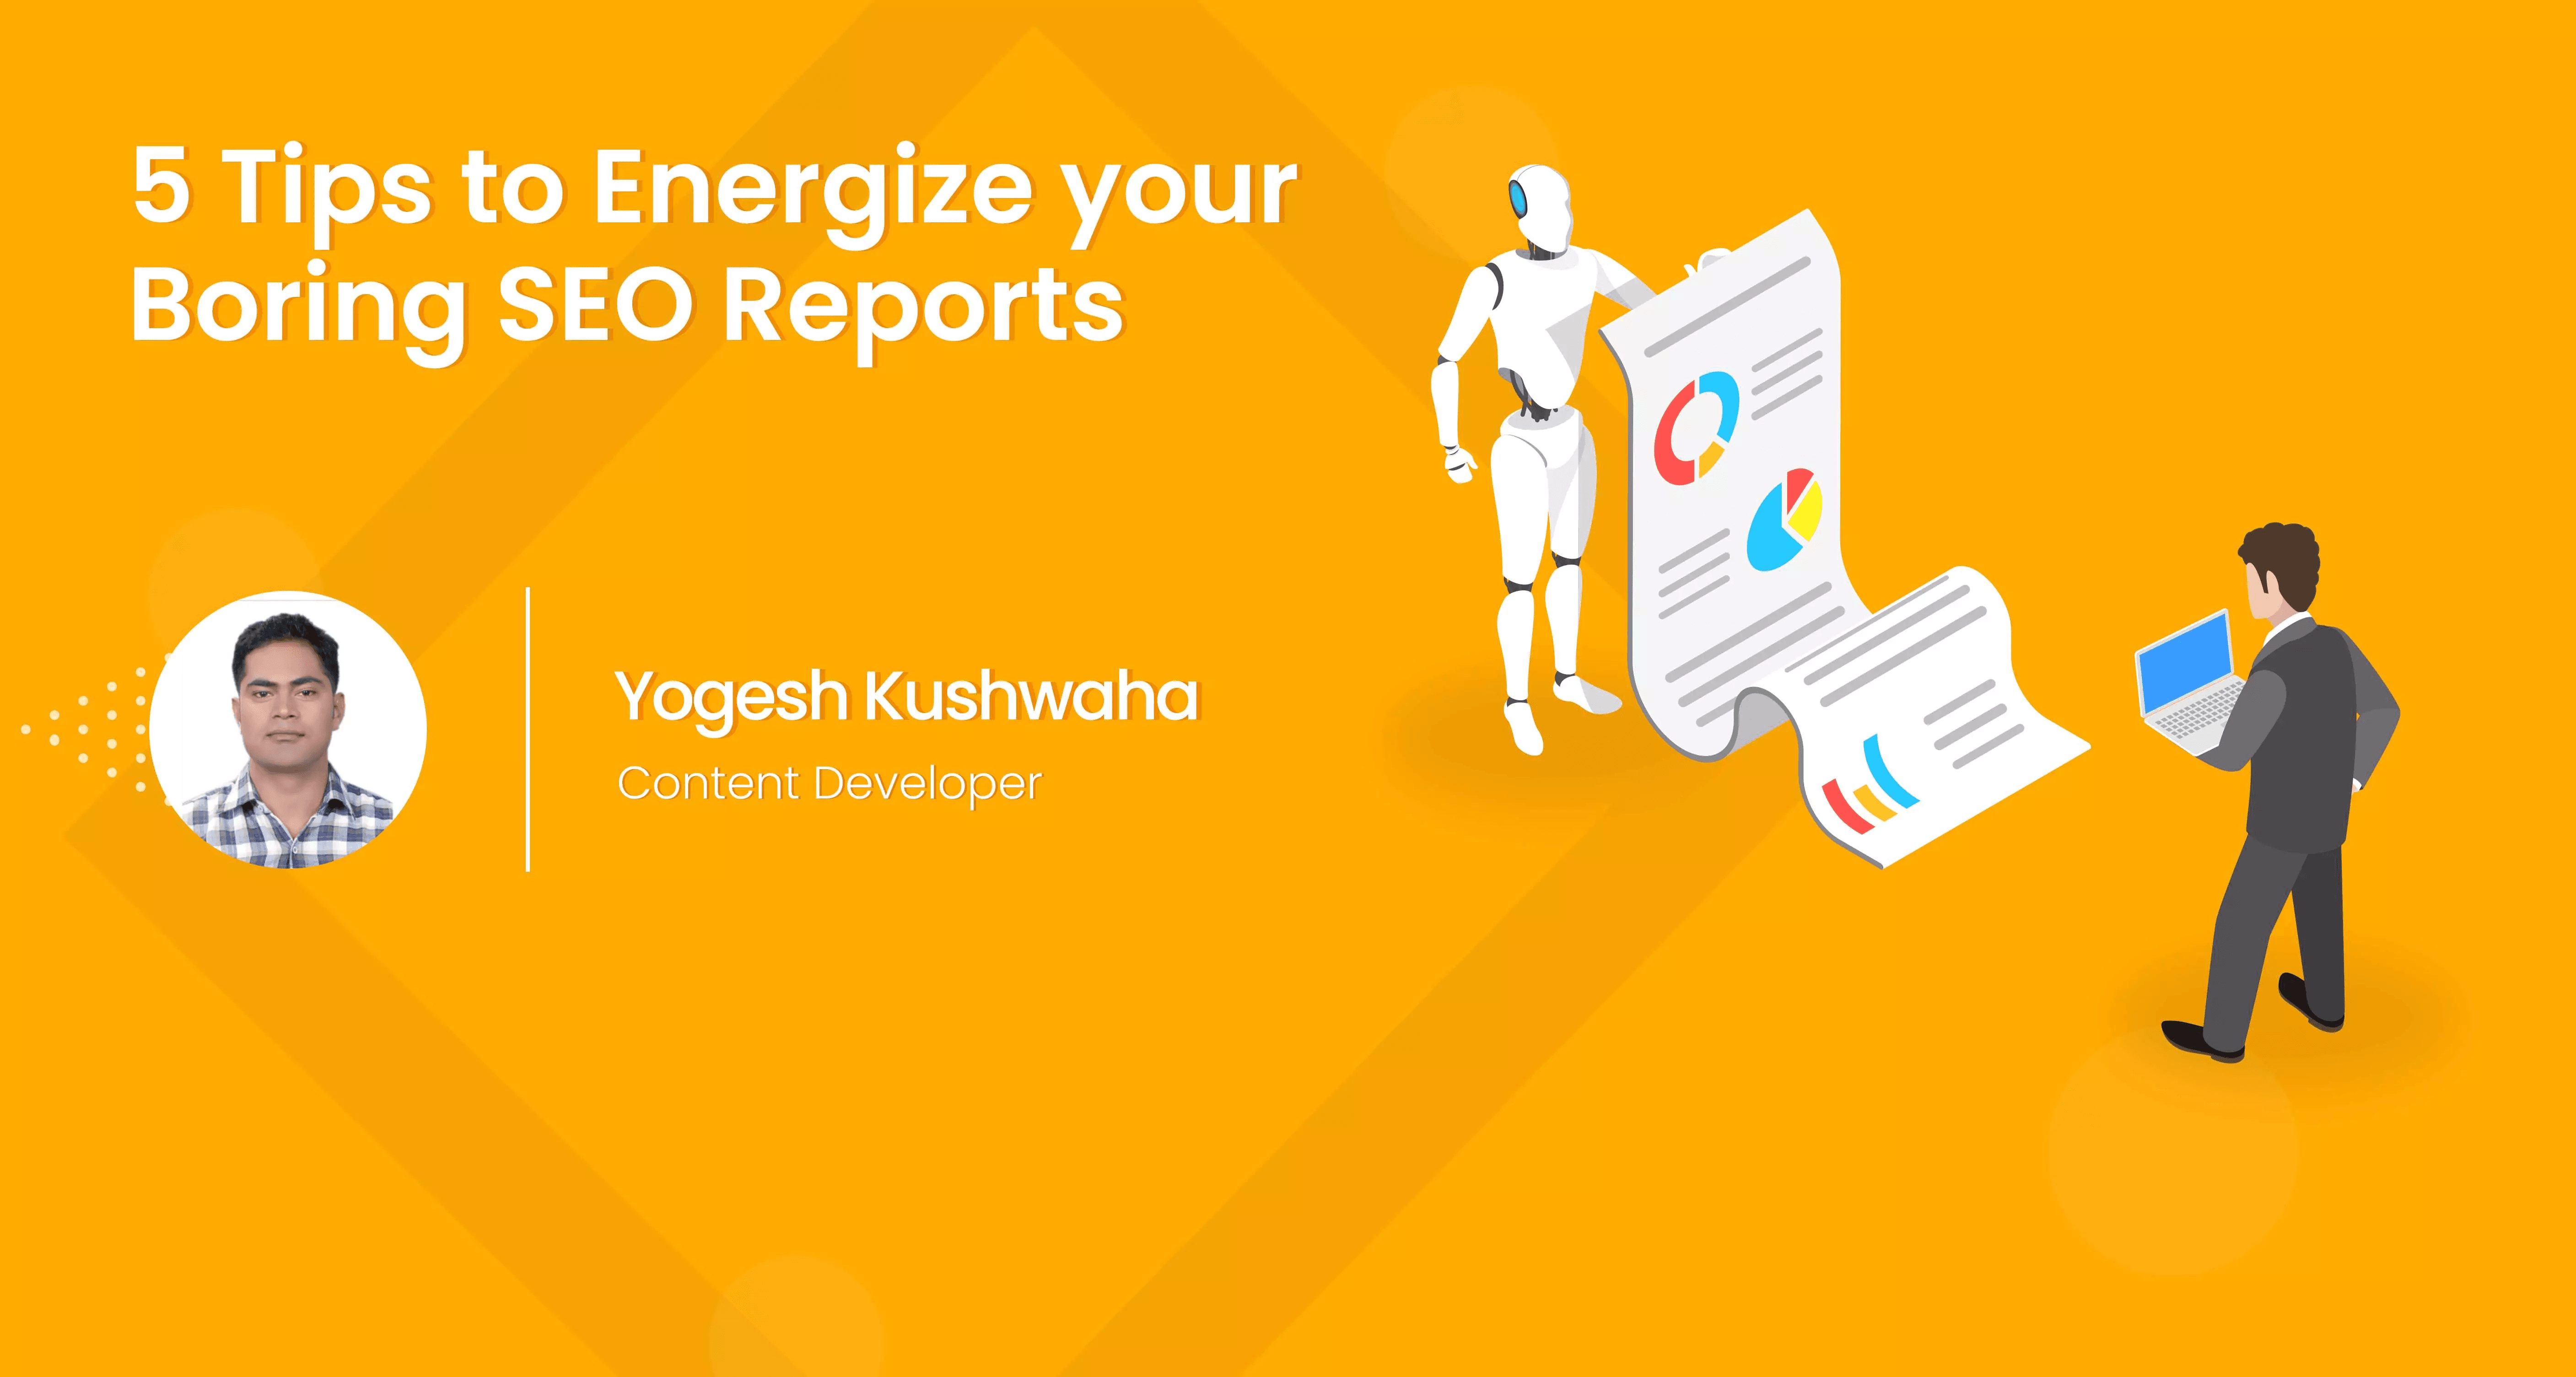 Guide to SEO Reporting